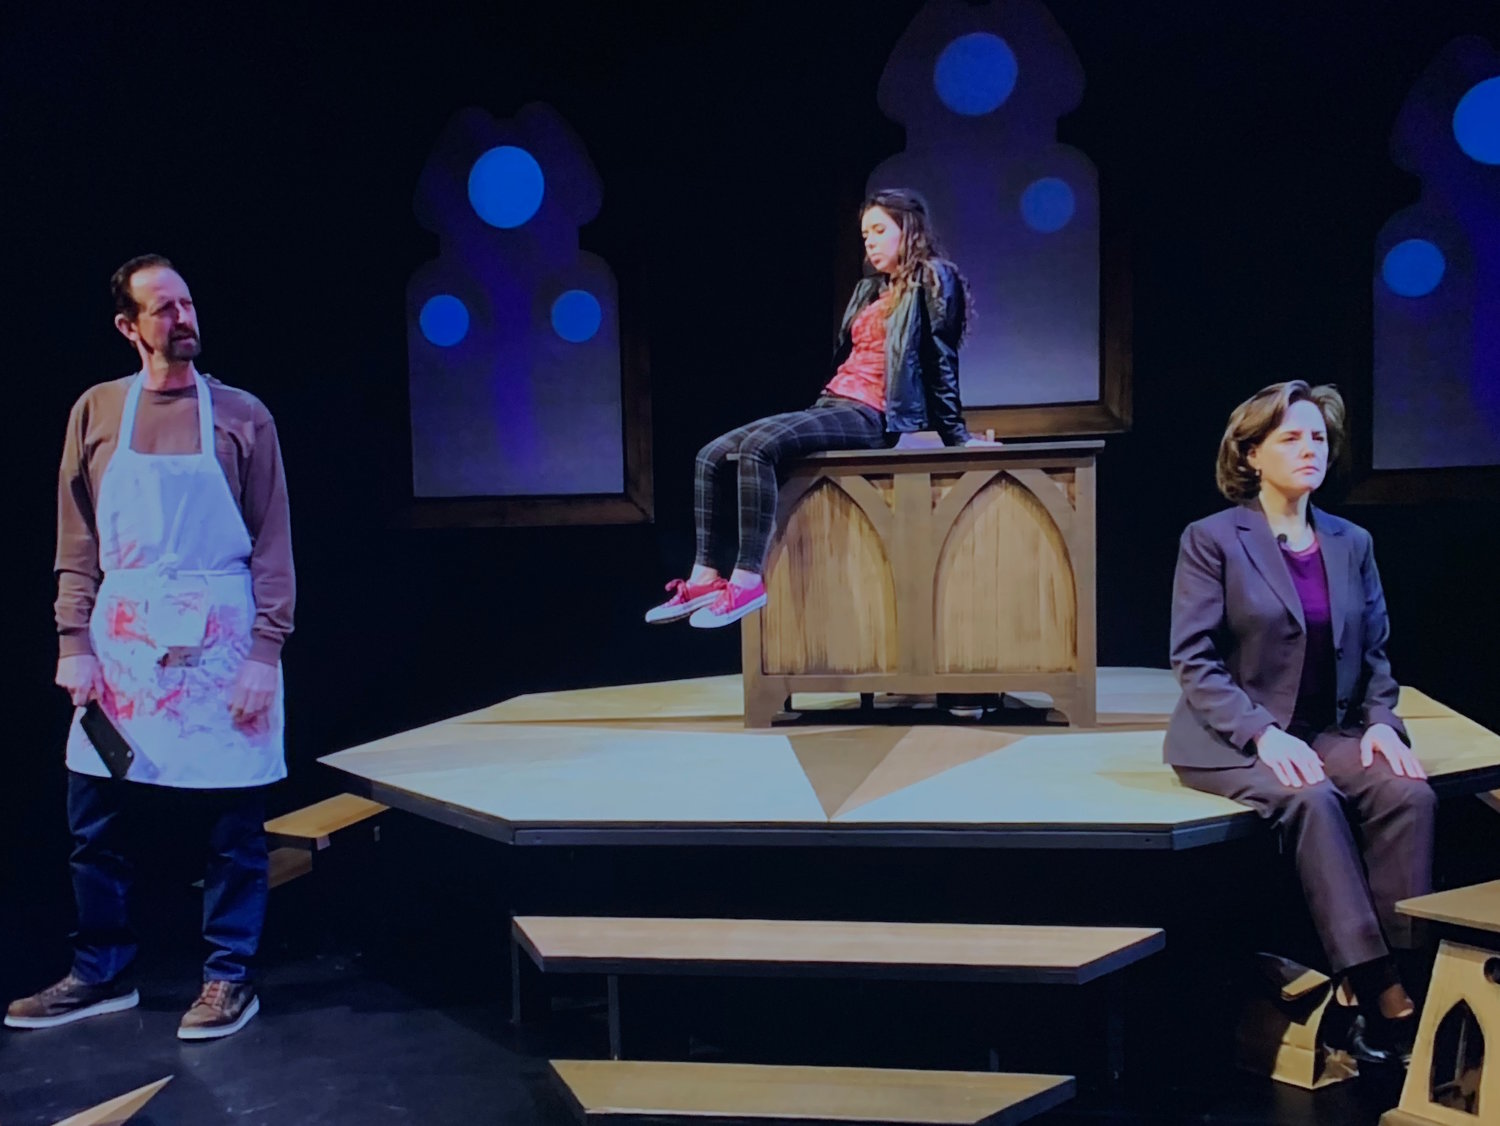 (Left to right): Mark Colson, Anna Ryzenga and Emily Sutton-Smith in "These Mortal Hosts."